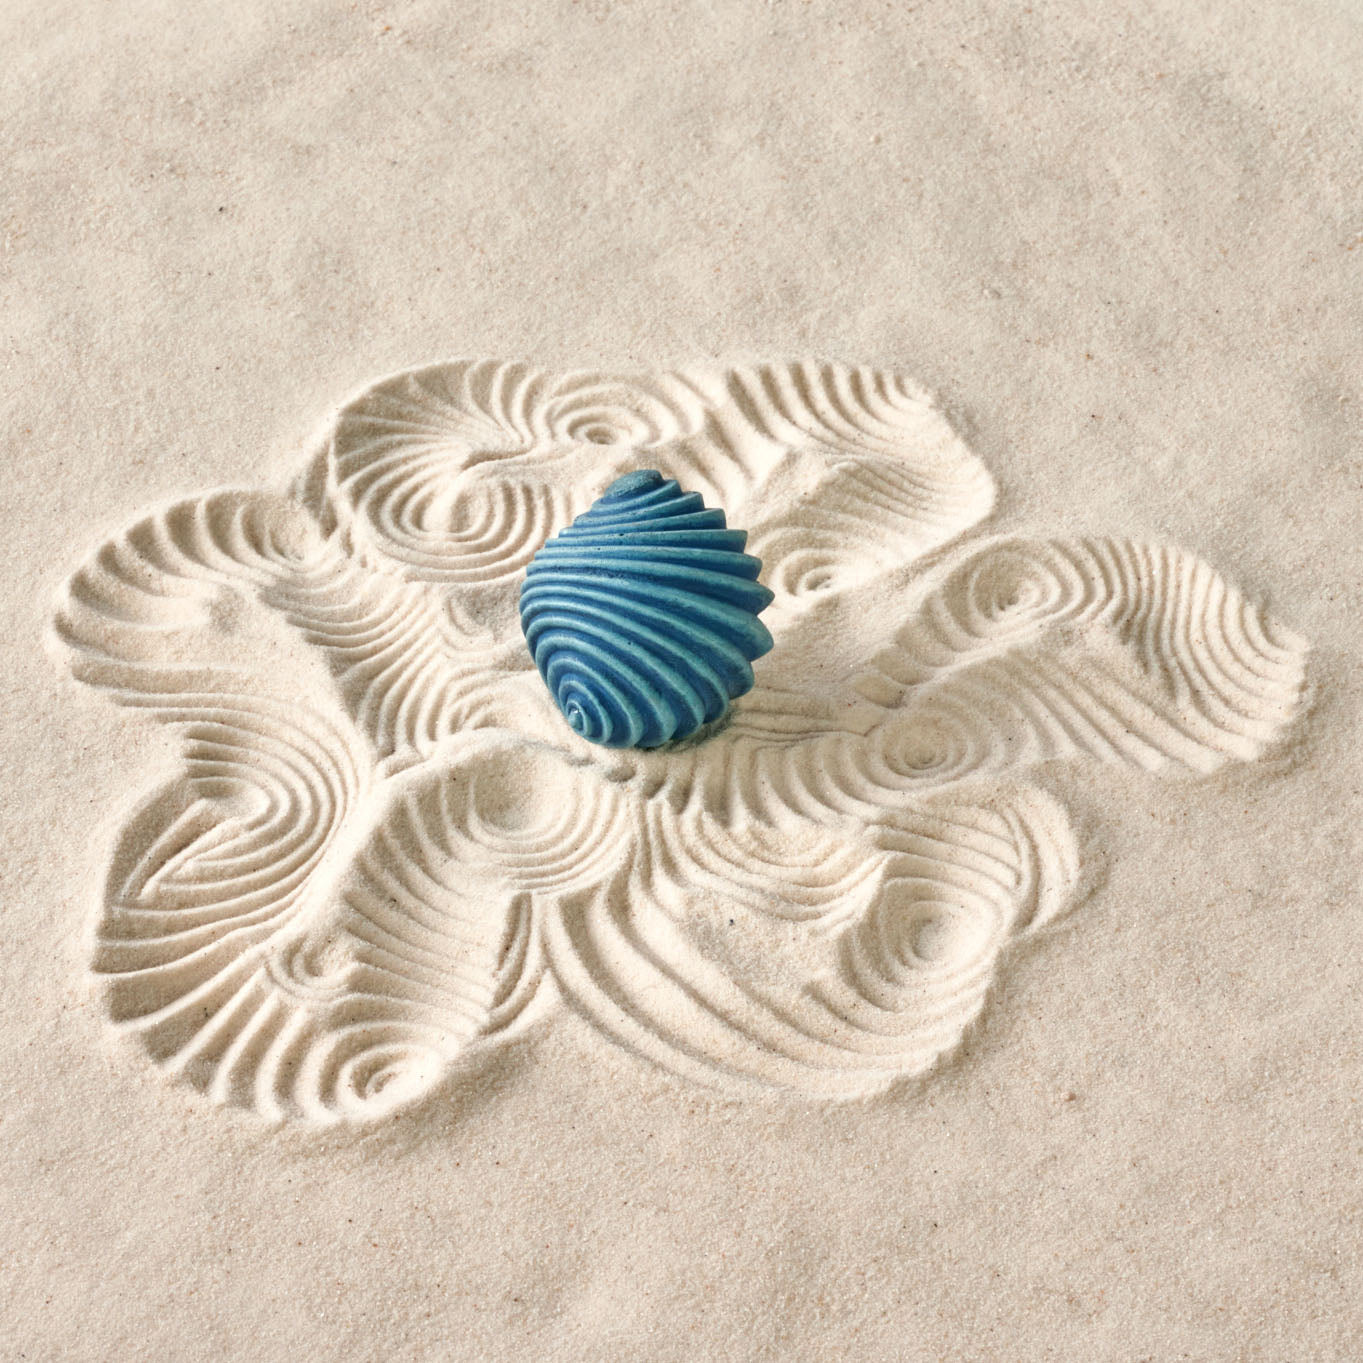 practice mindfulness with a premium sand texturing tool